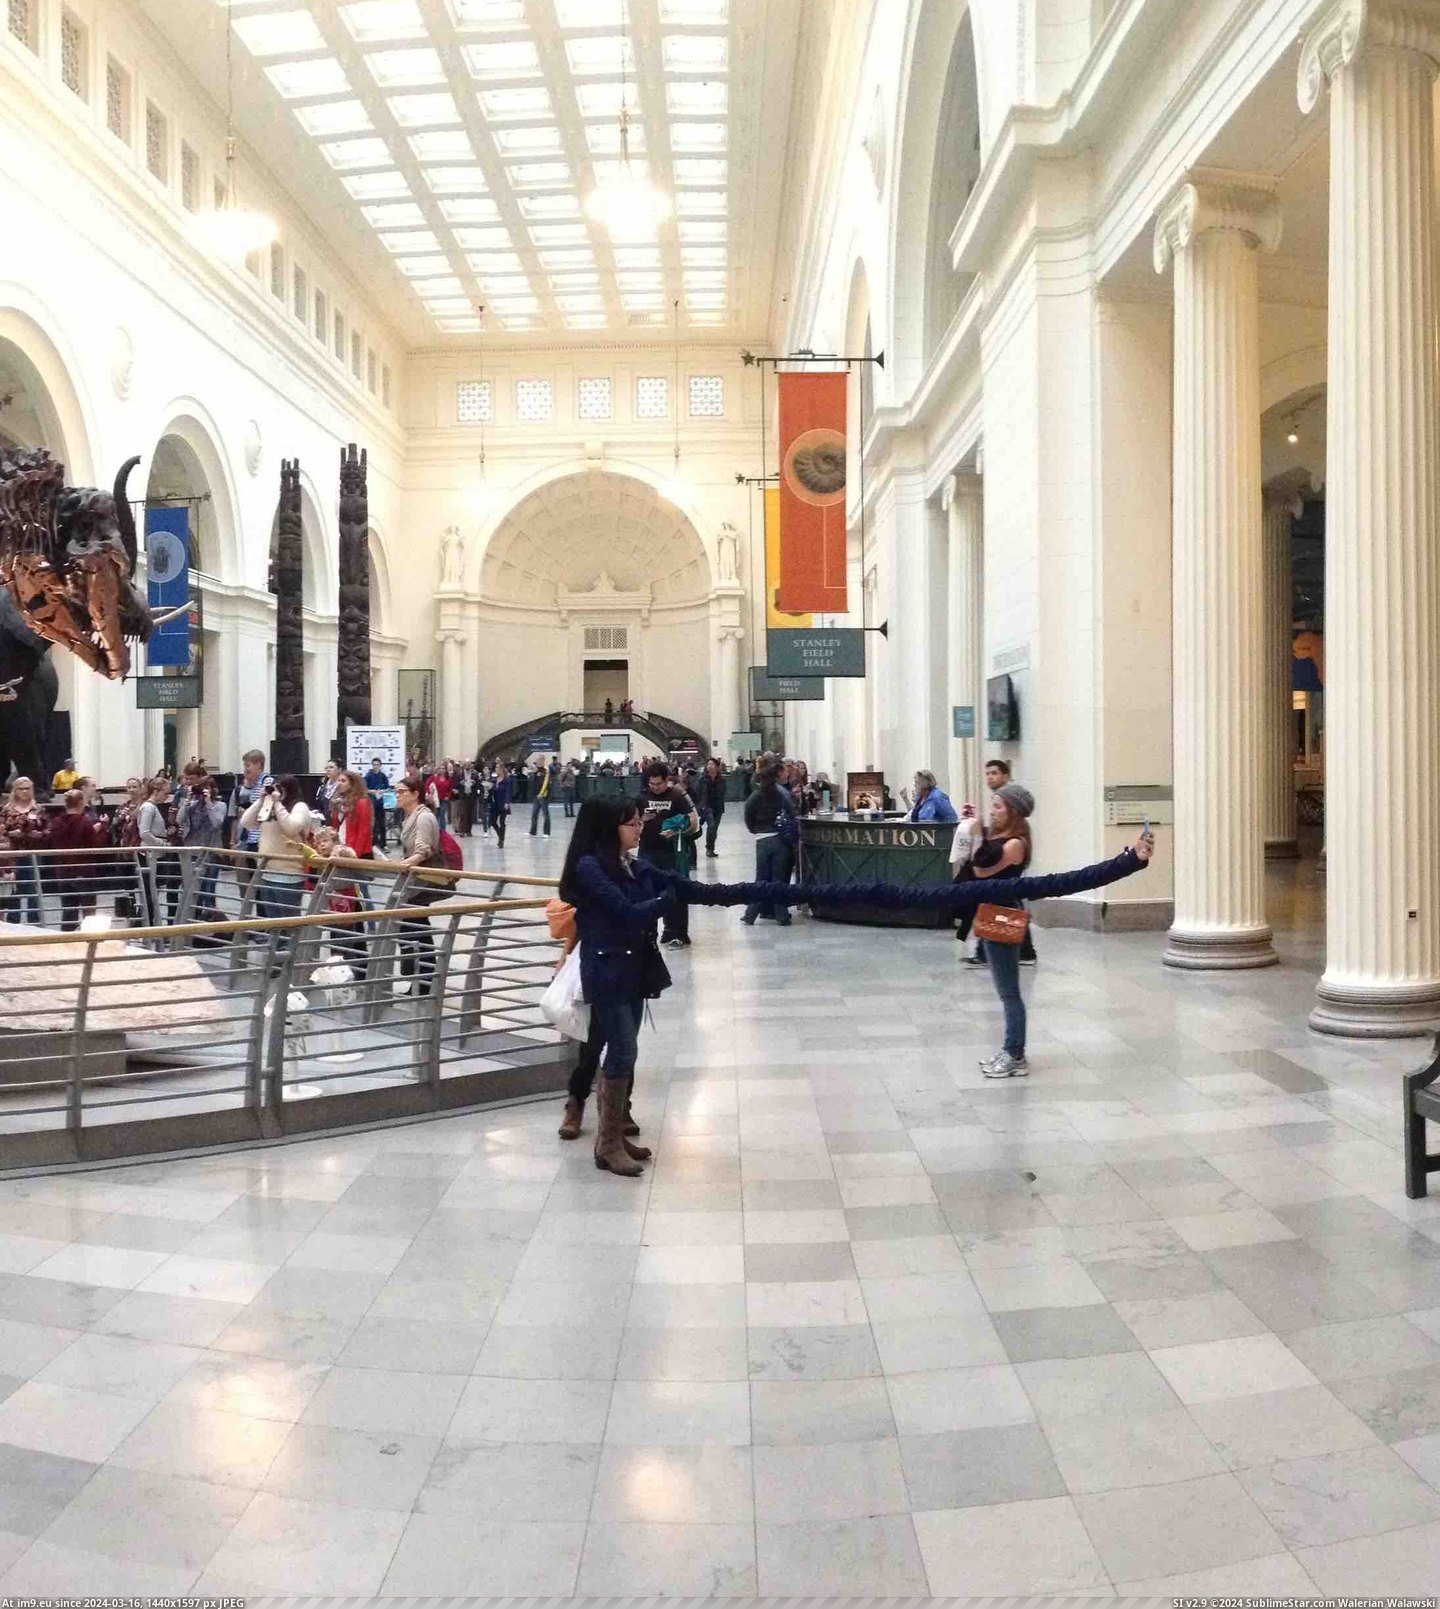 #Girl #Photo #Selfie #Ultimate #Panoramic #Ended #Making #Museum #Hand [Pics] took a panoramic photo at a museum and ended up making it look like this girl has the ultimate selfie hand. Pic. (Изображение из альбом My r/PICS favs))